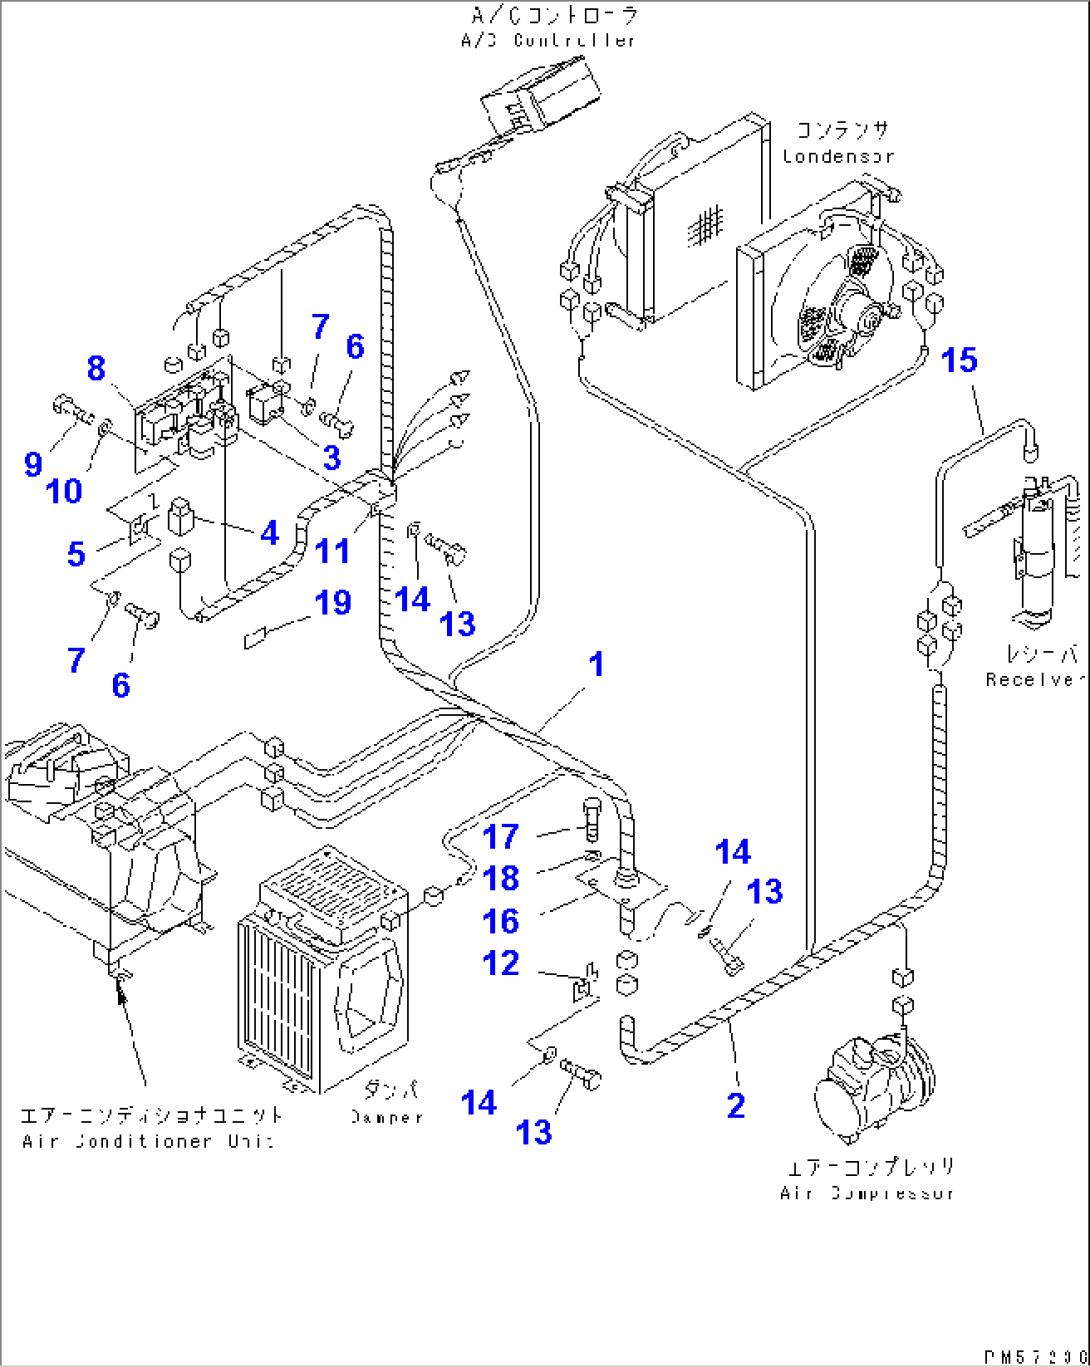 AIR CONDITIONER (9/10) (ELECTRICAL PARTS)